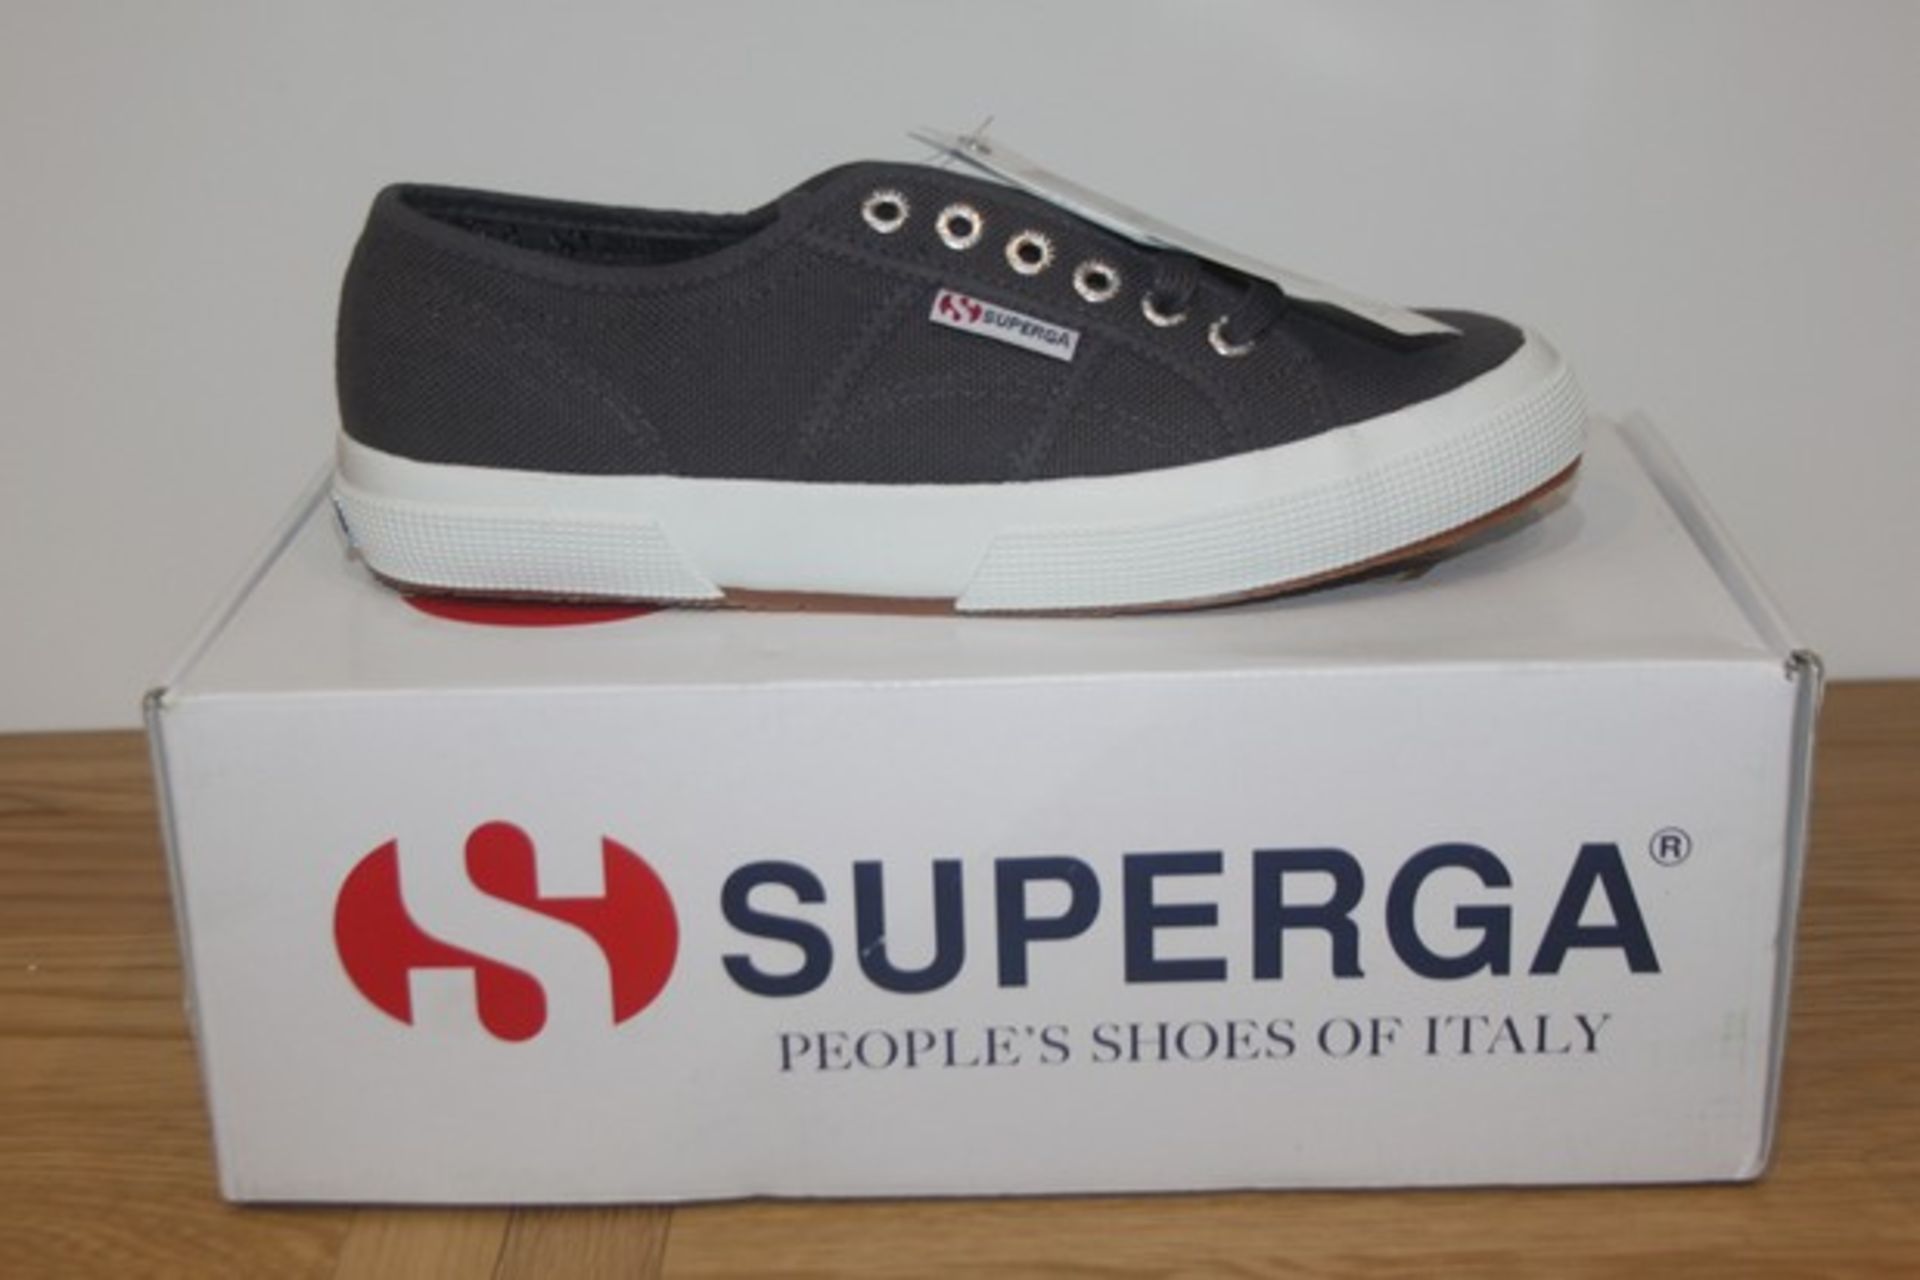 BOXED BRAND NEW SUPERGA SHOES SIZE 7 RRP £55 (DSSALVAGE)